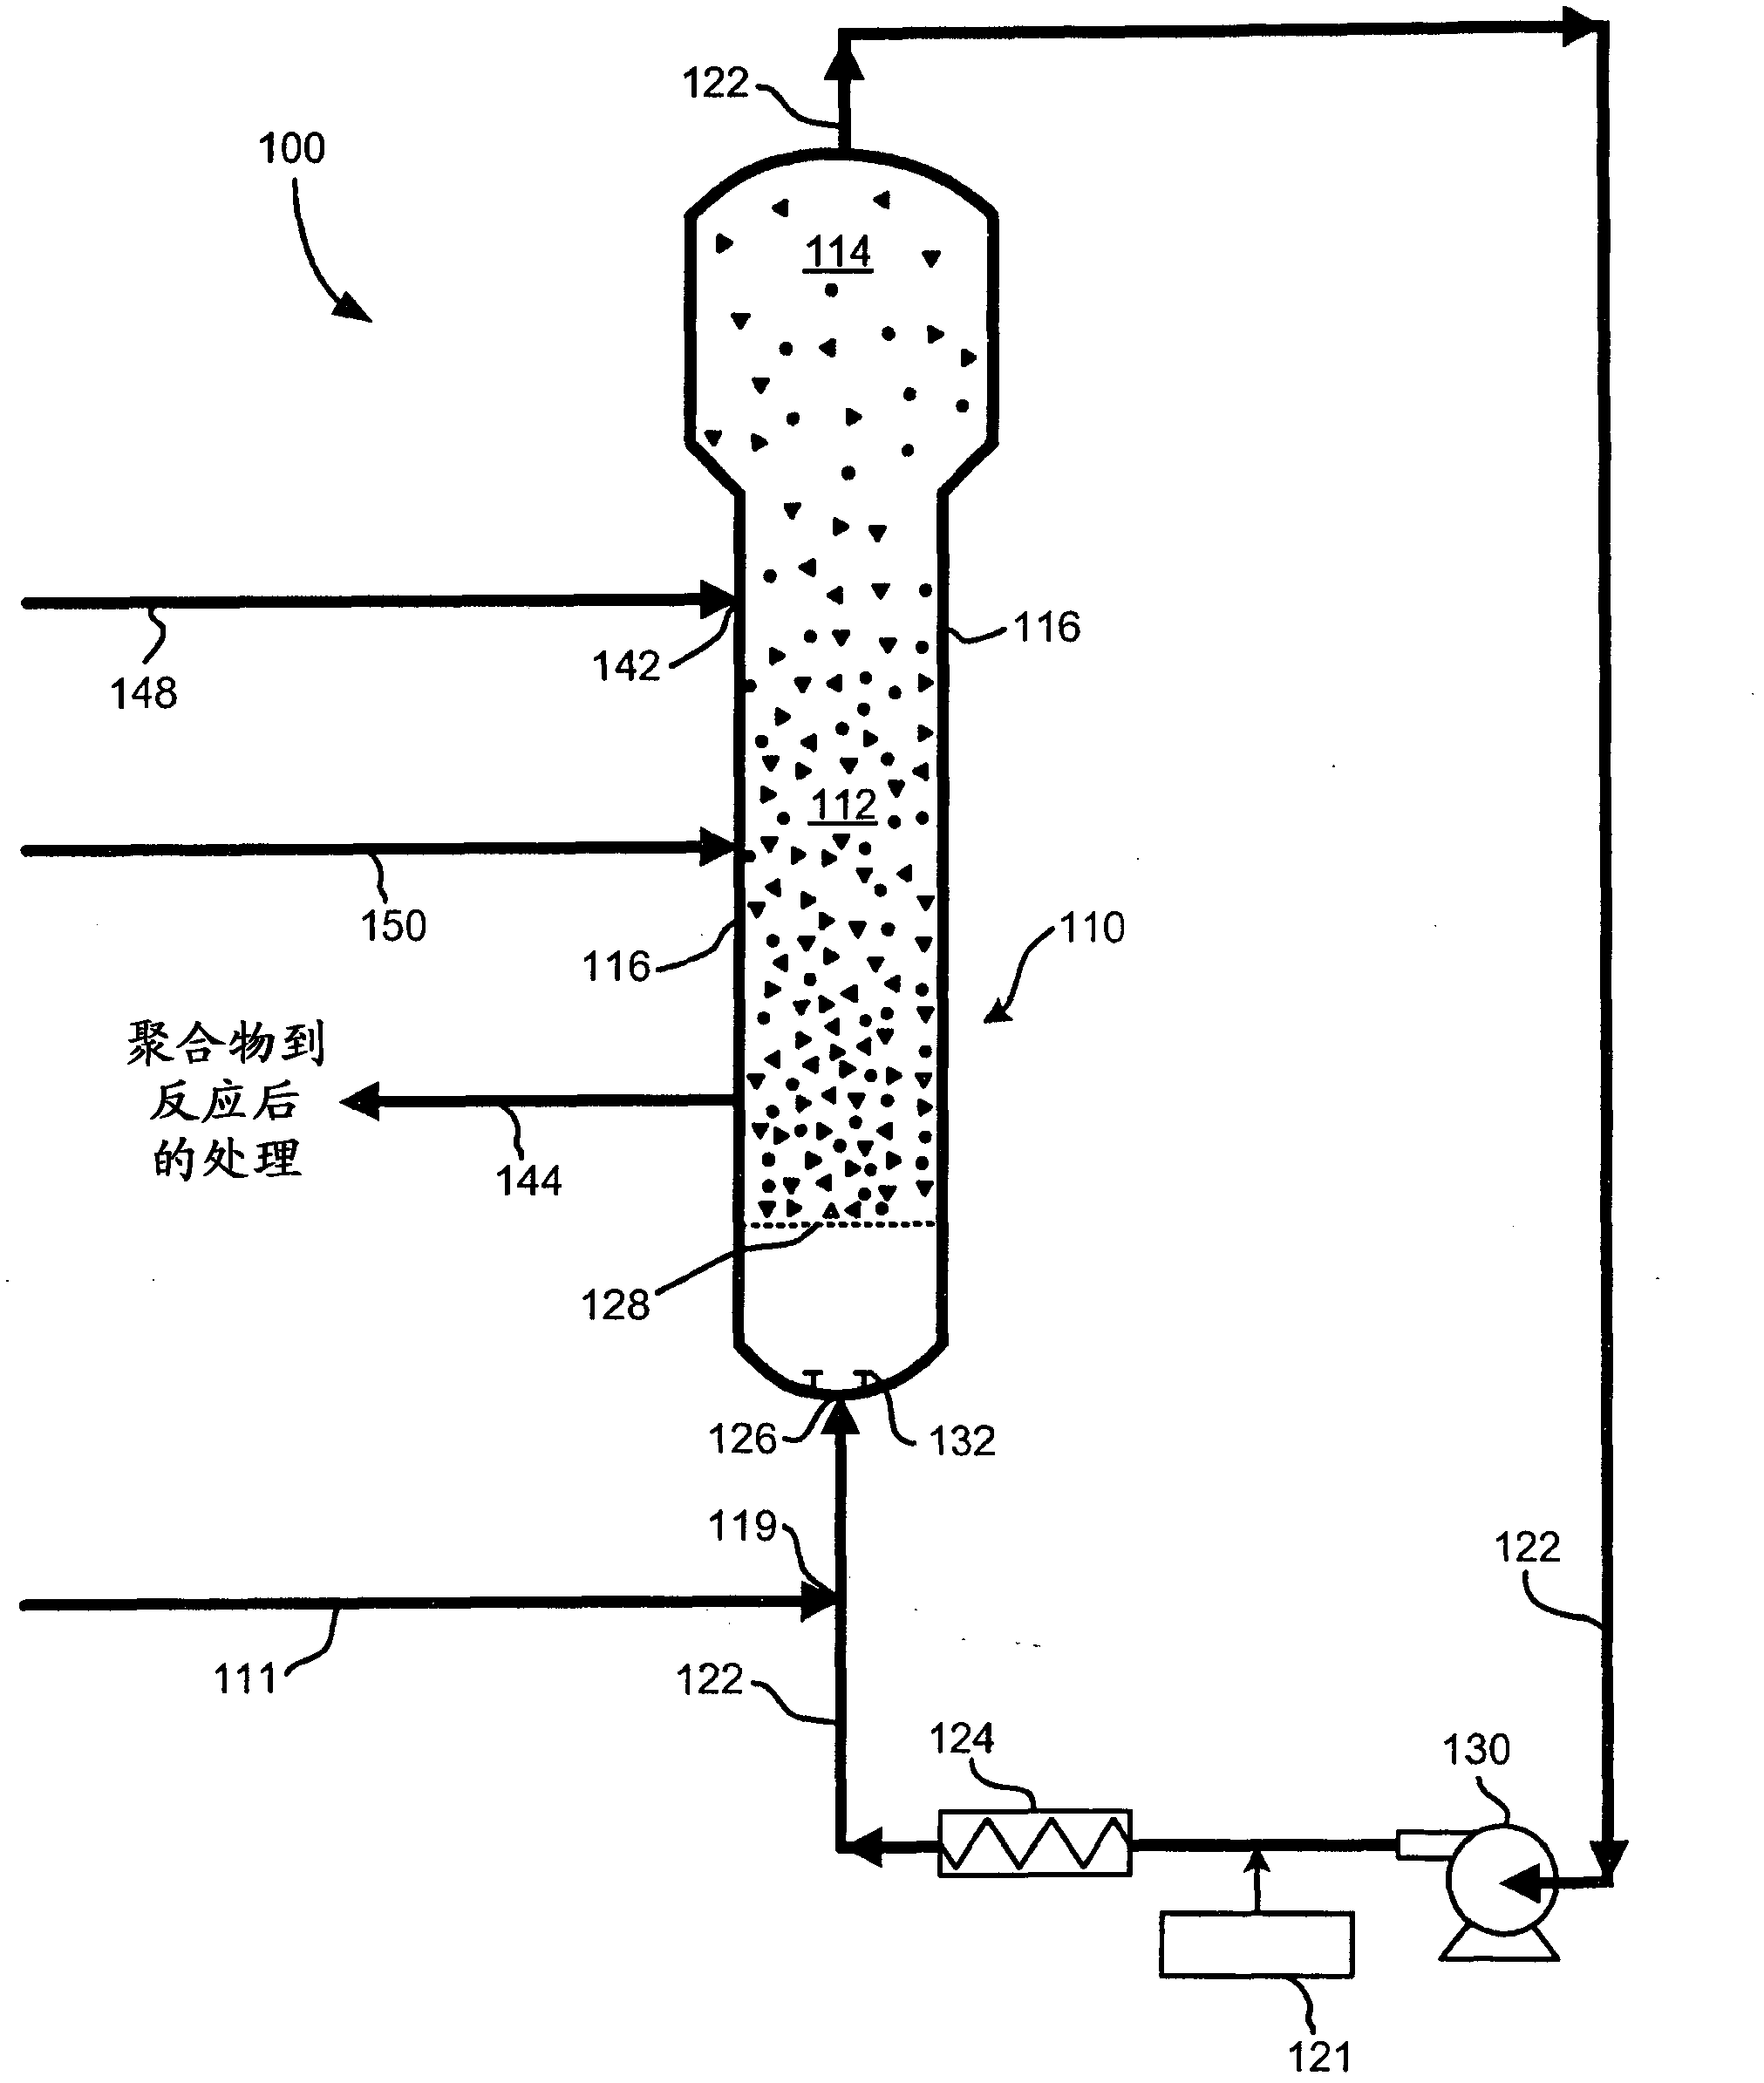 Polymerization process using a supported constrained geometry catalyst